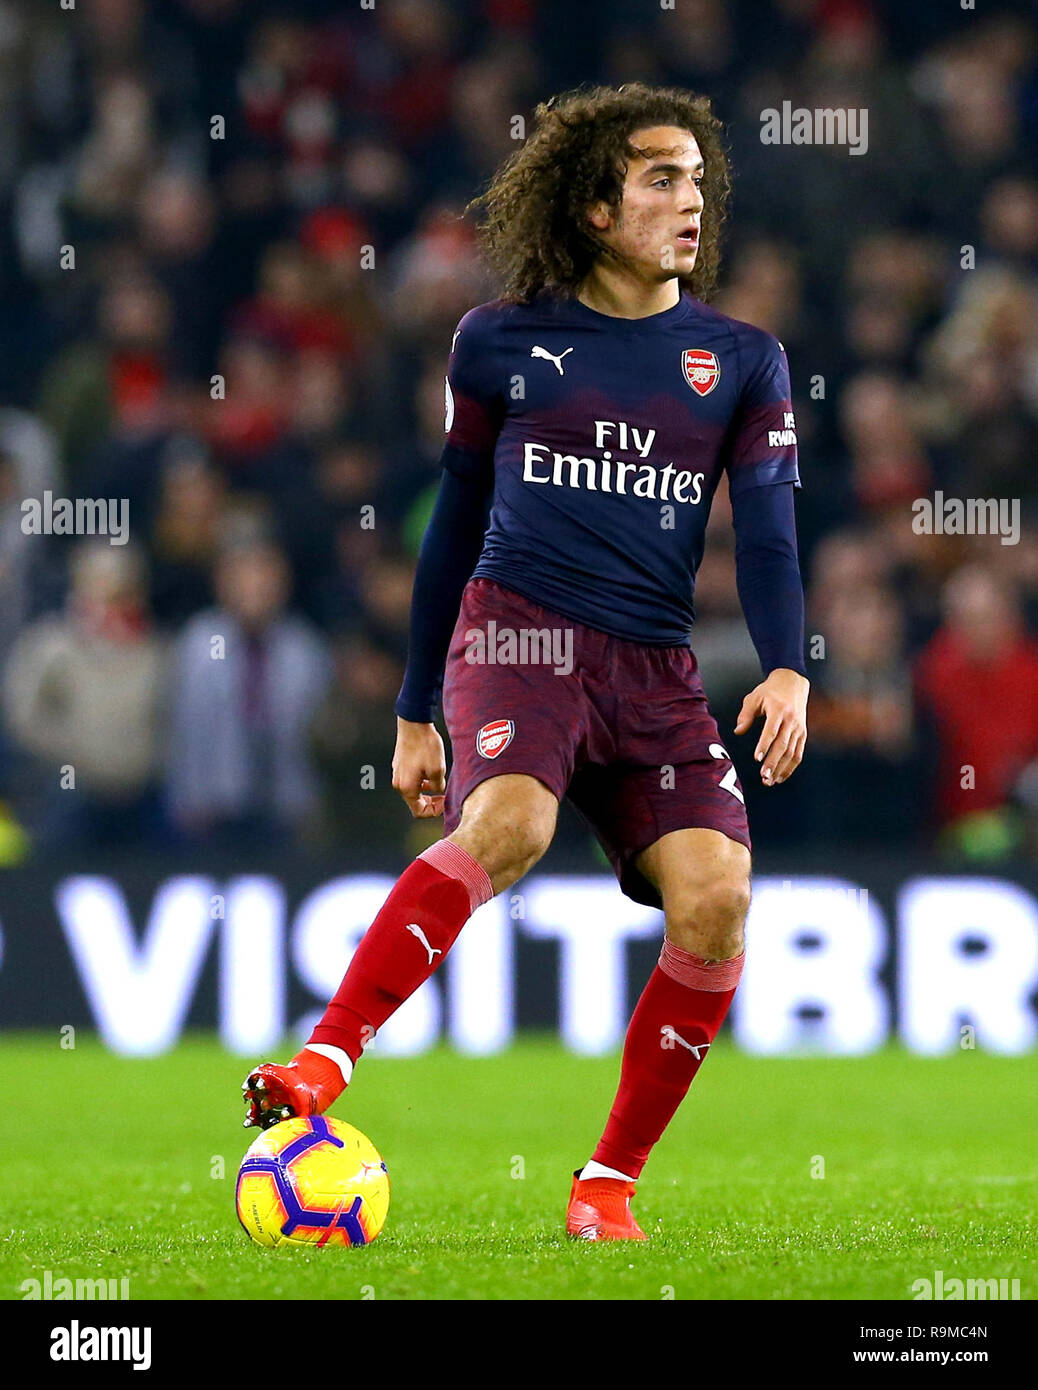 Arsenal's Matteo Guendouzi during the Premier League match at the AMEX Stadium, Brighton. PRESS ASSOCIATION Photo. Picture date: Wednesday December 26, 2018. See PA story SOCCER Brighton. Photo credit should read: Gareth Fuller/PA Wire. RESTRICTIONS: No use with unauthorised audio, video, data, fixture lists, club/league logos or 'live' services. Online in-match use limited to 120 images, no video emulation. No use in betting, games or single club/league/player publications. Stock Photo